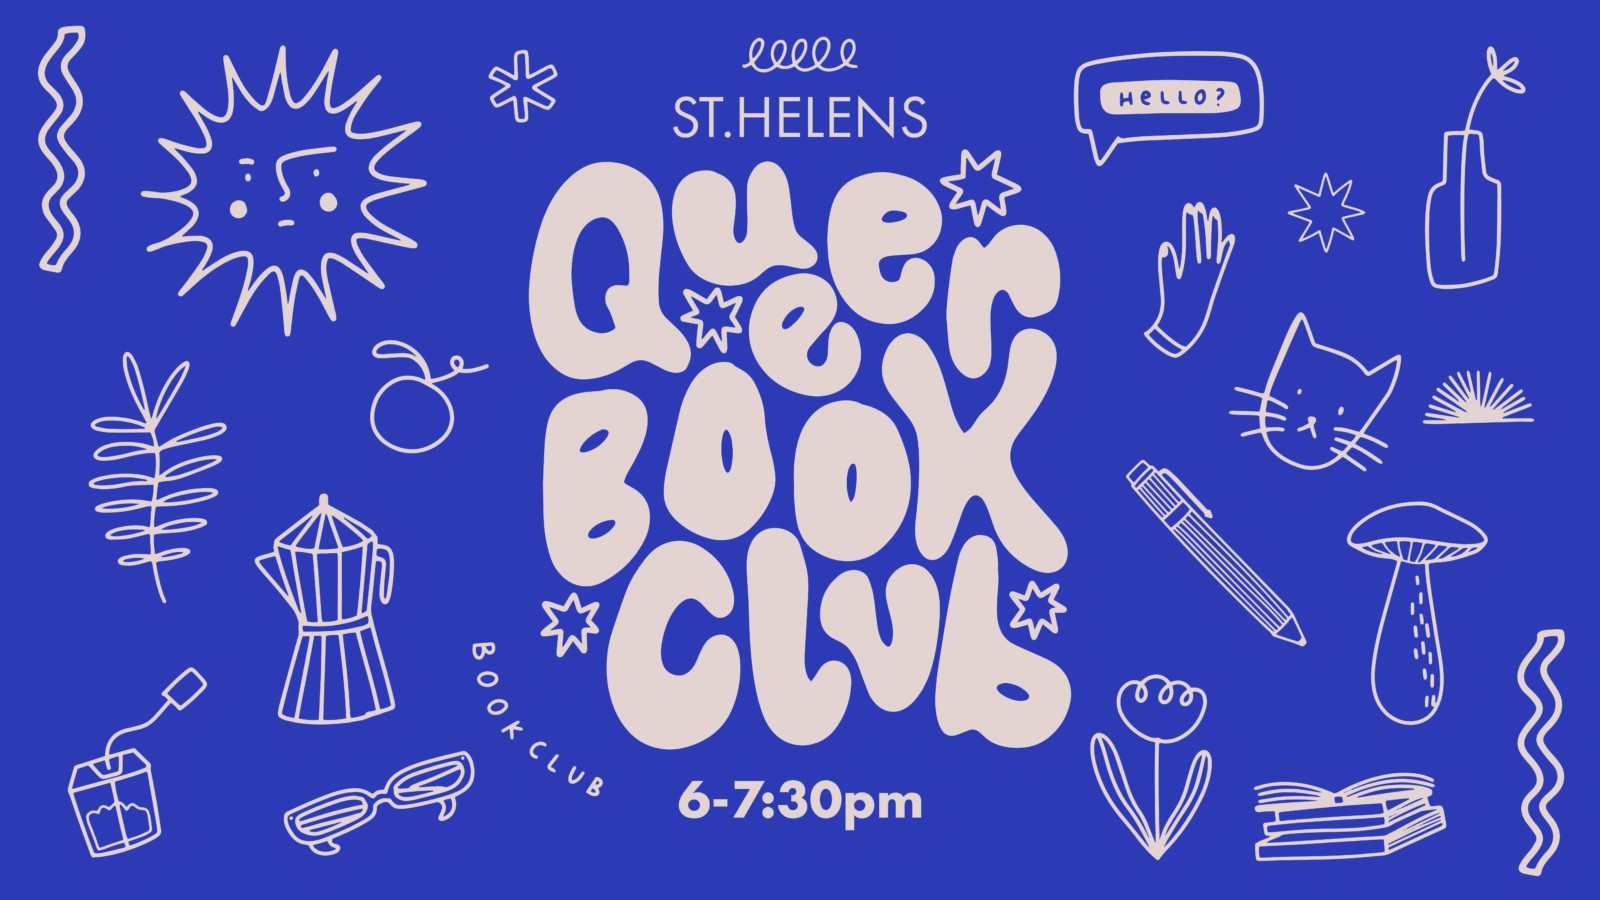 An illustration with a dark blue background and off white illustrated text that reads 'Queer Book Club'. Around the title are lots of different doodles filling the background, including plants, books, a mushroom, a pen and a cafetière.